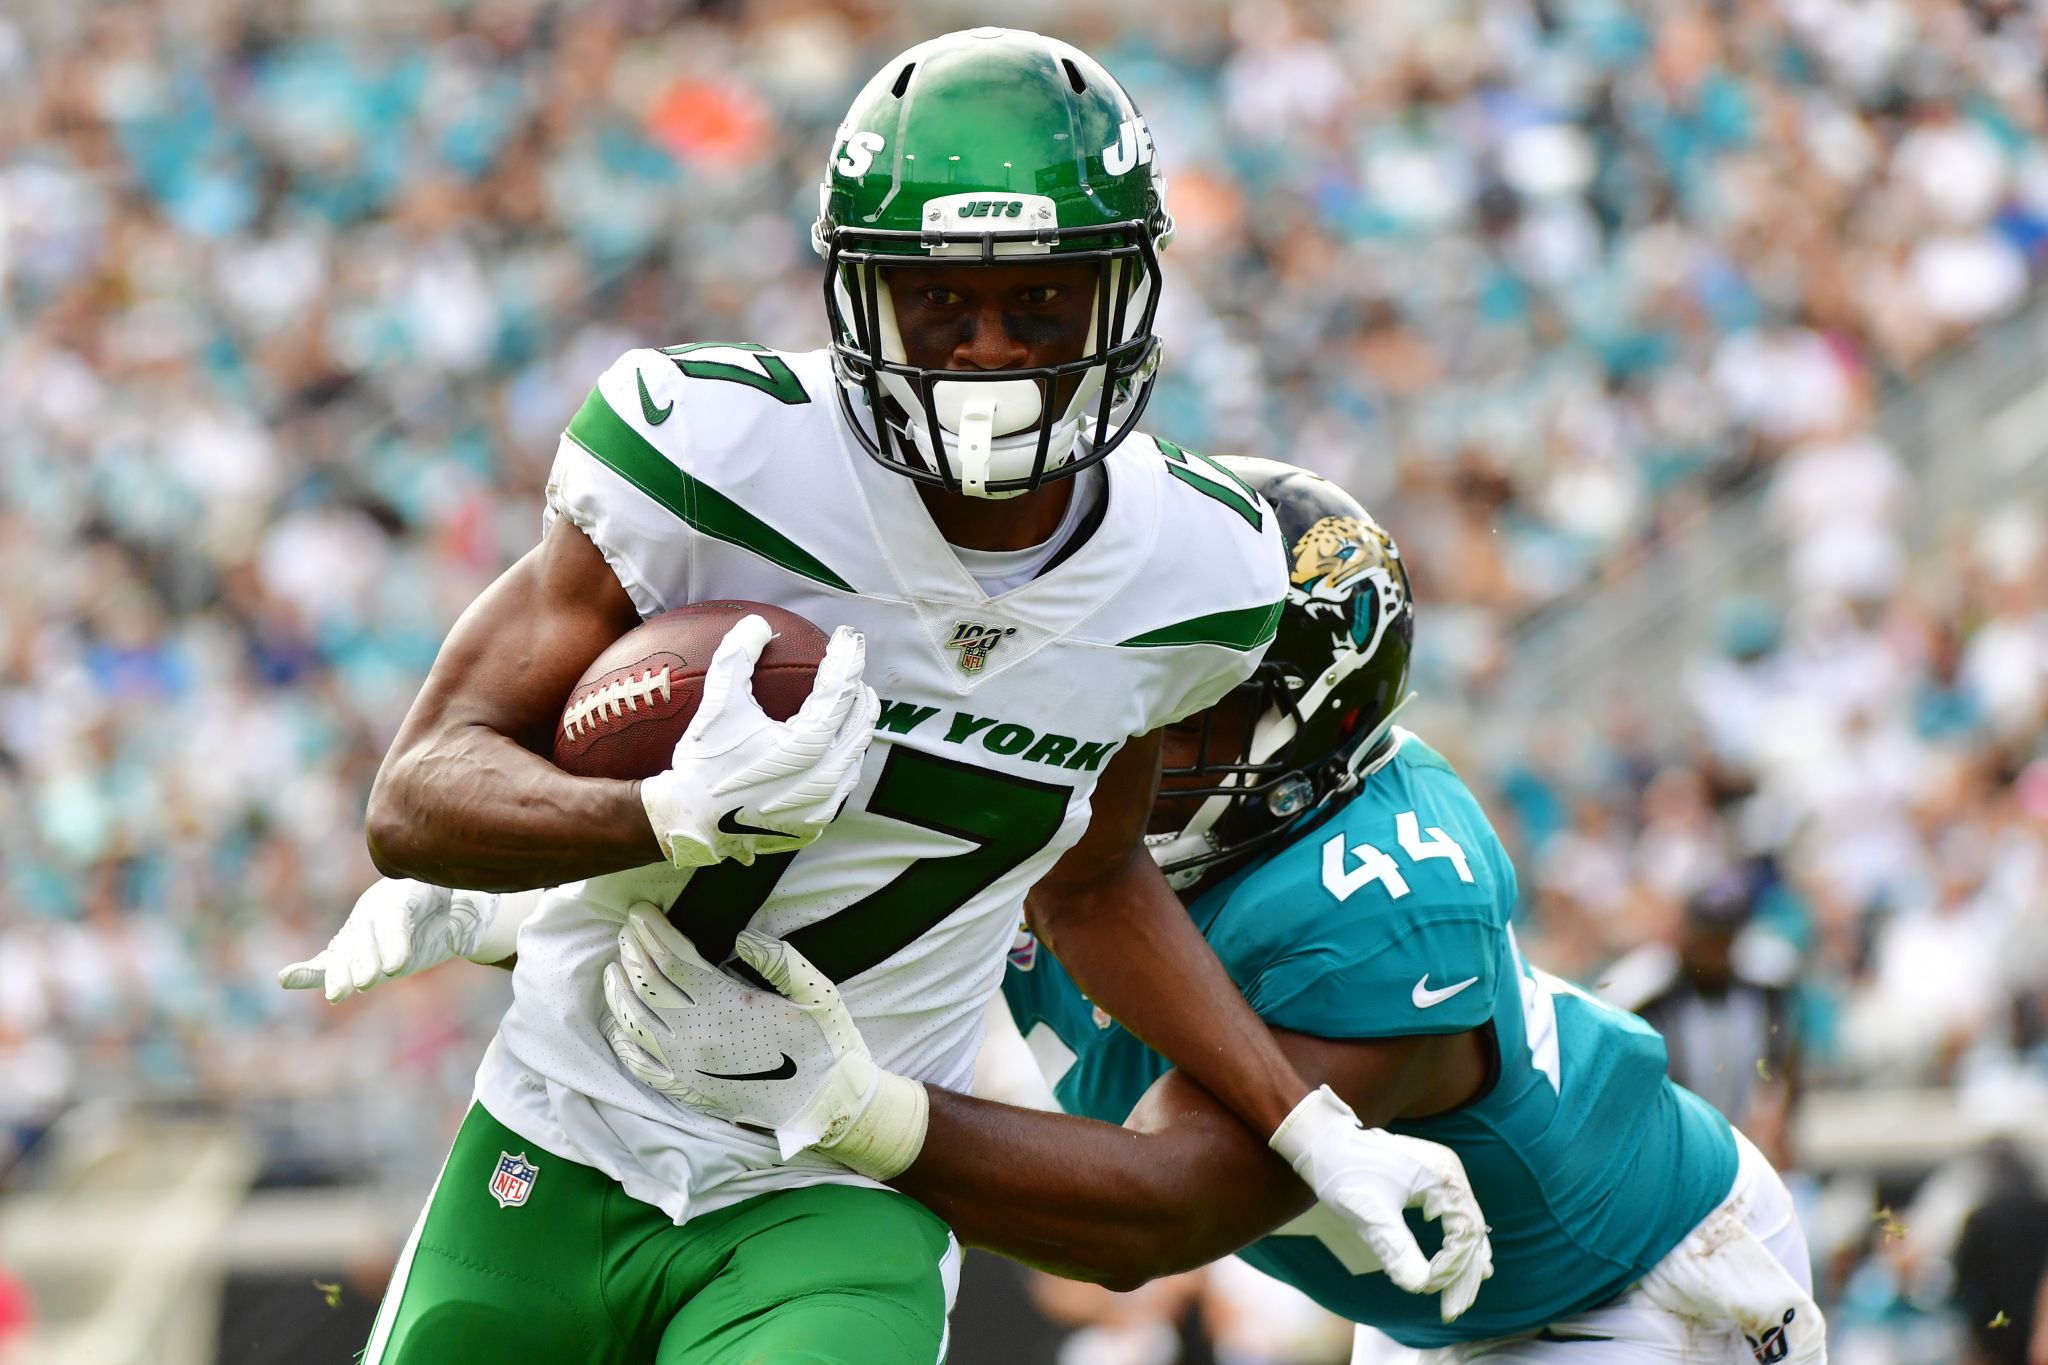 Jets wide receiver Vyncint Smith: 'It's going to be a big year'